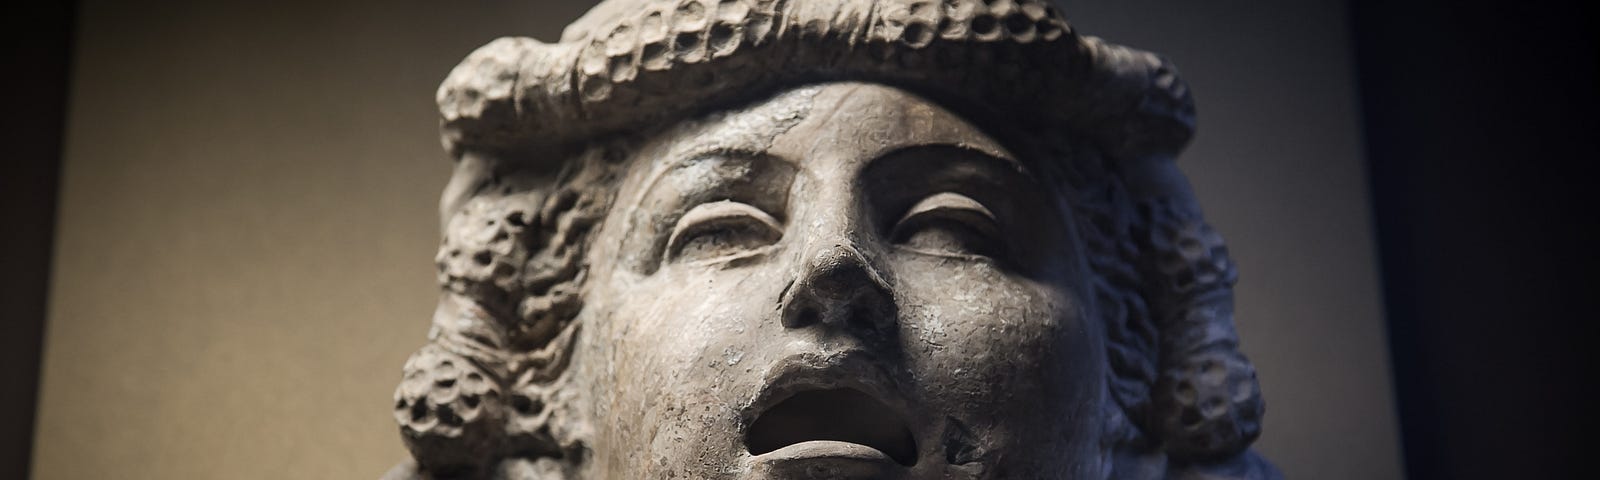 A greyish stone head statue of presumed Medusa with her mouth ajar and hair in more likeable braids (no visible snakes).